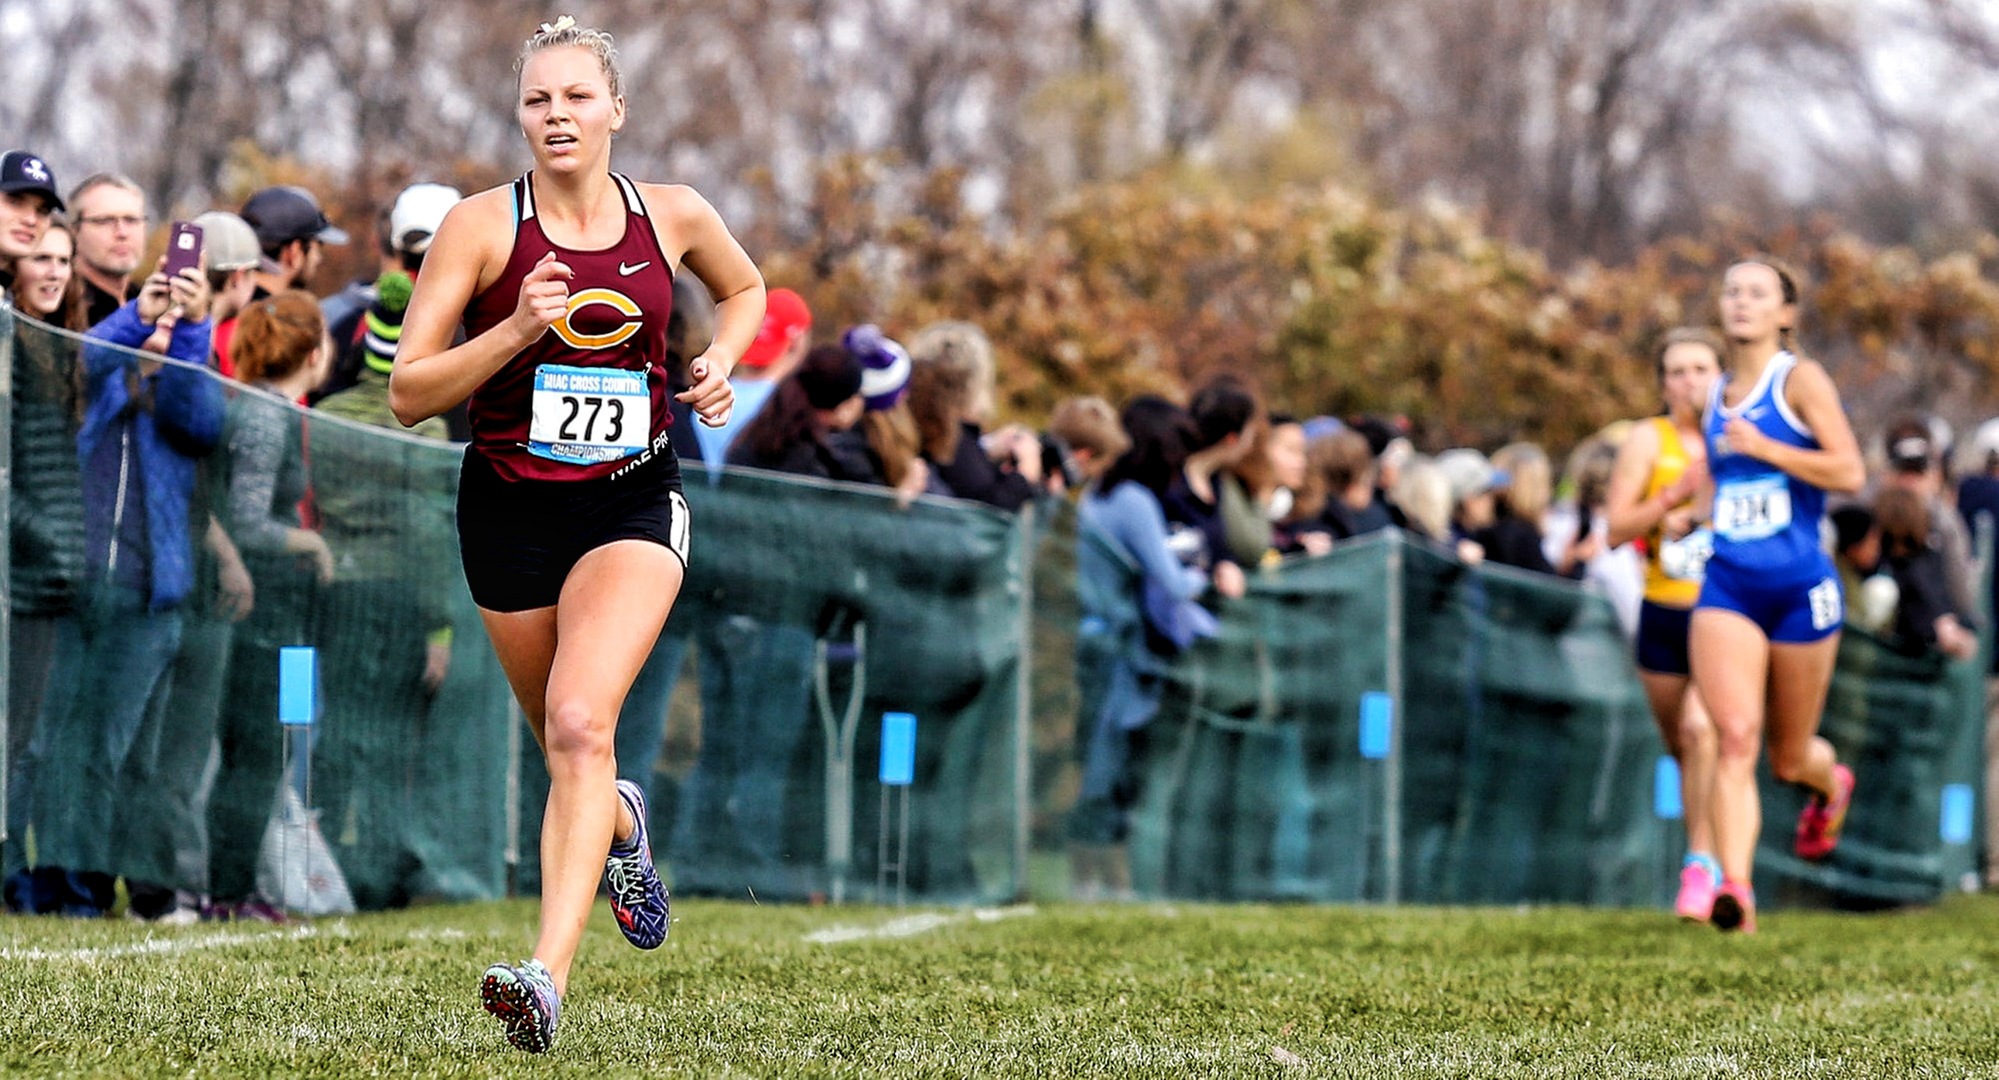 Kara Andersen nears the finish line at the MIAC Championship Meet (Picture courtesy of Nathan Lodermeier)